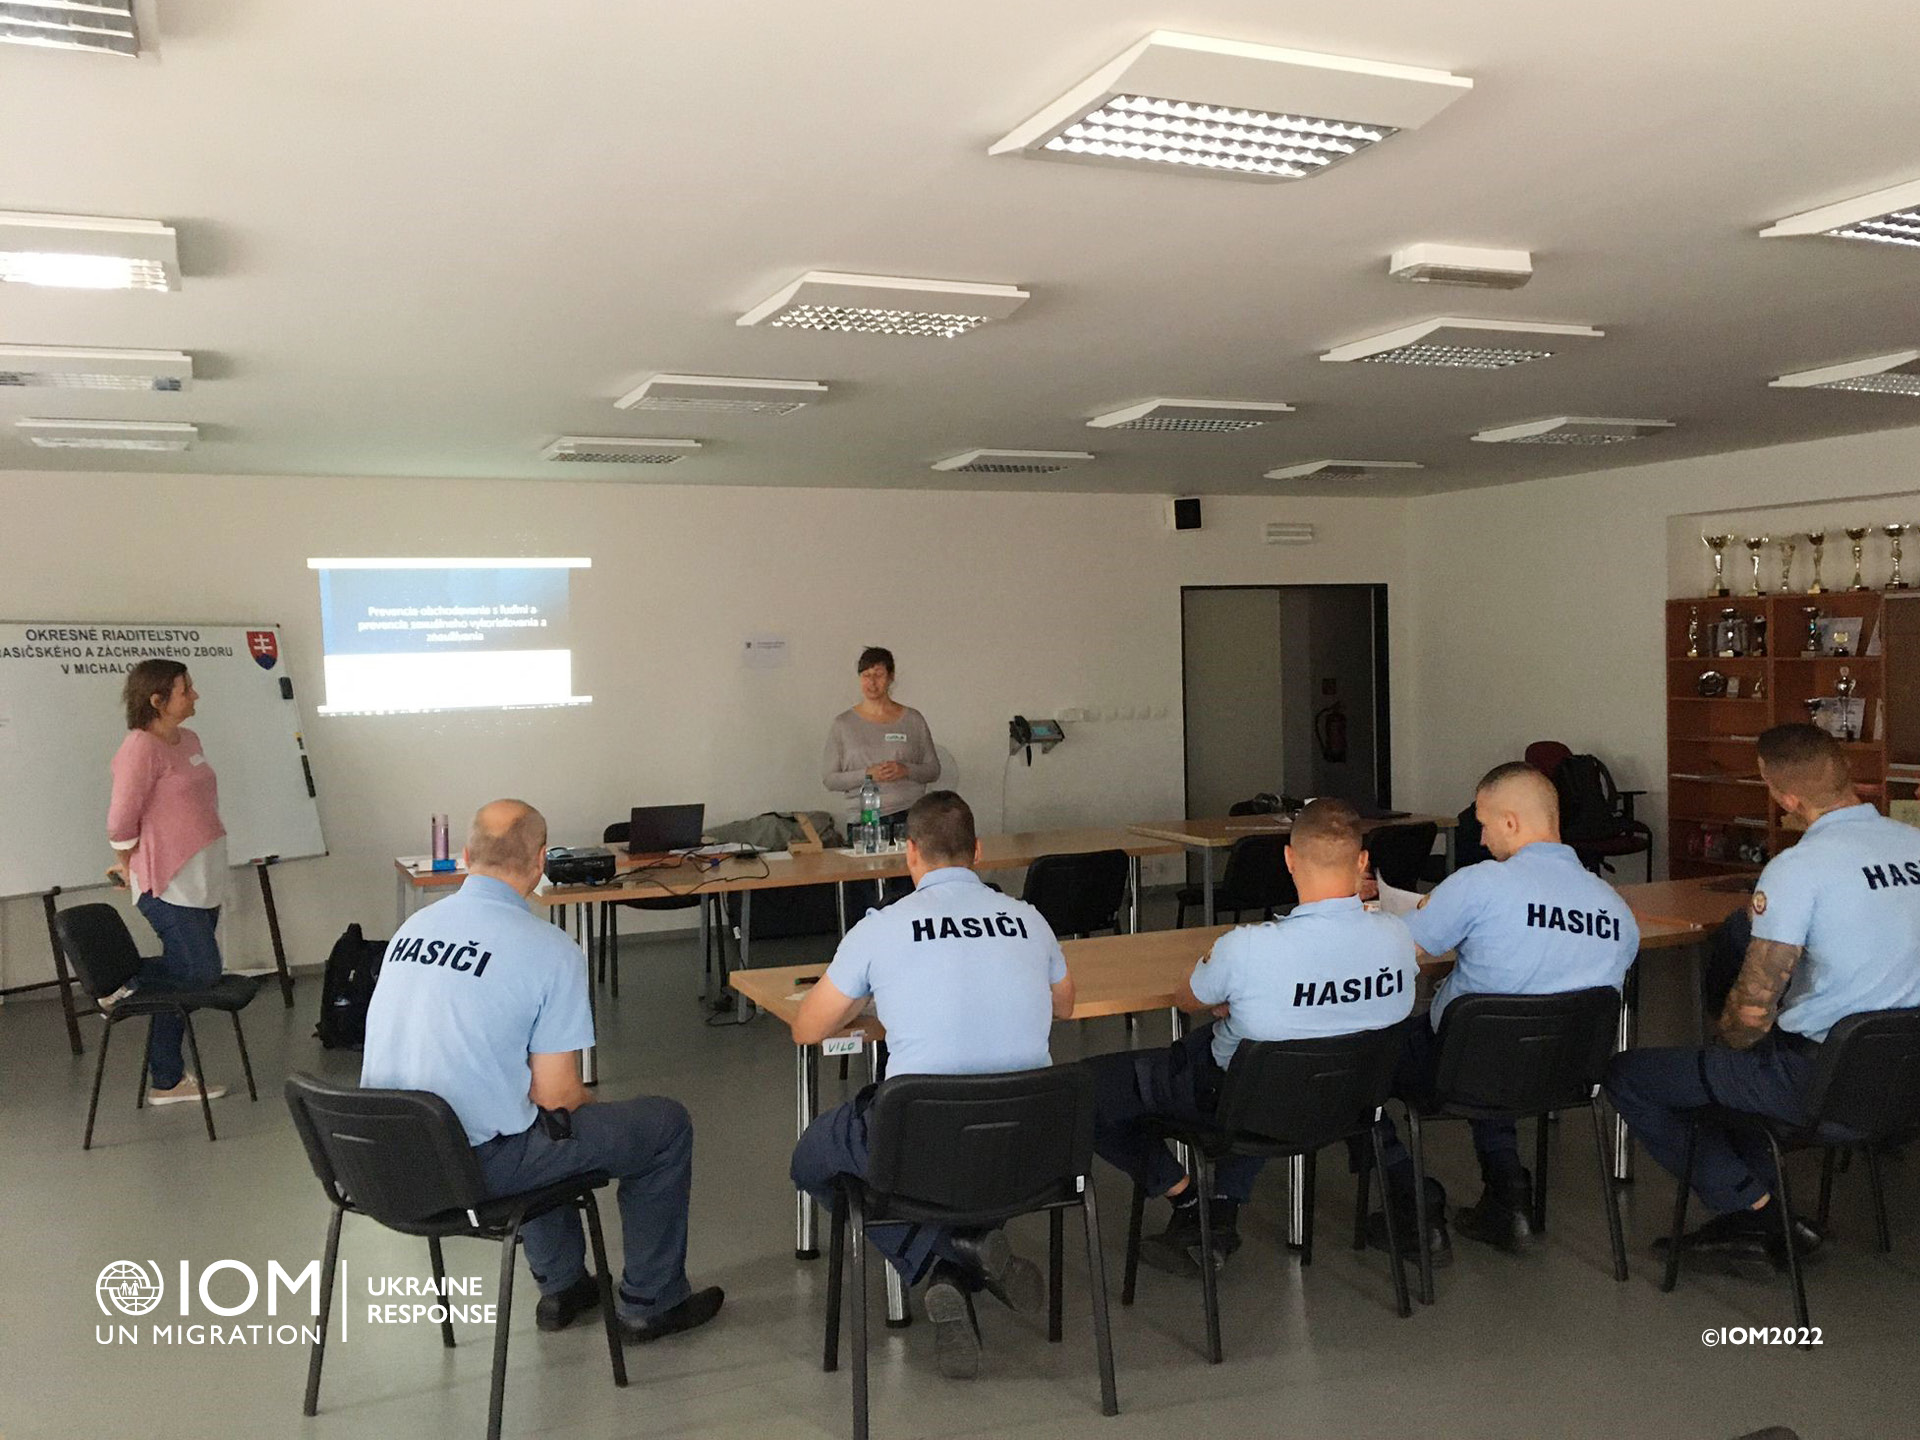 Participants of PSEA trainings for Fire and Rescue Service recognized these training sessions as important and useful. Photo © International Organization for Migration (IOM) 2022.